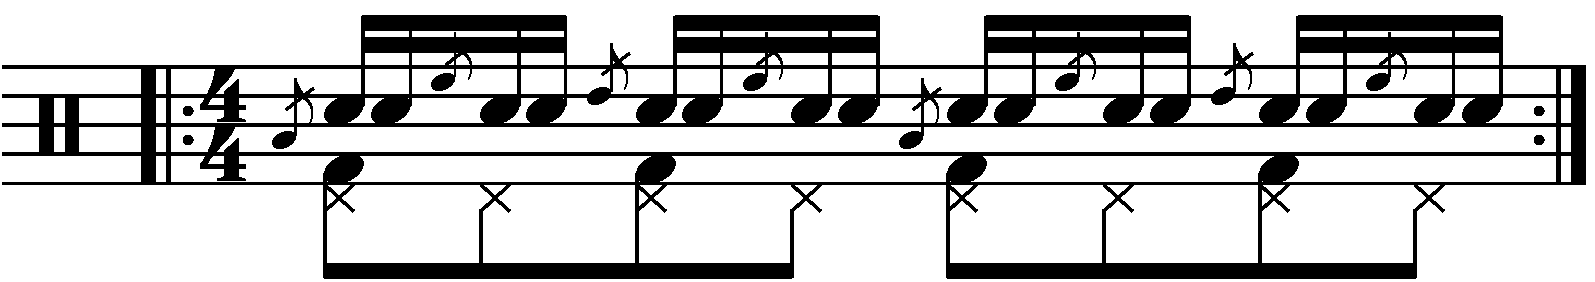 Flam tap with moving grace notes